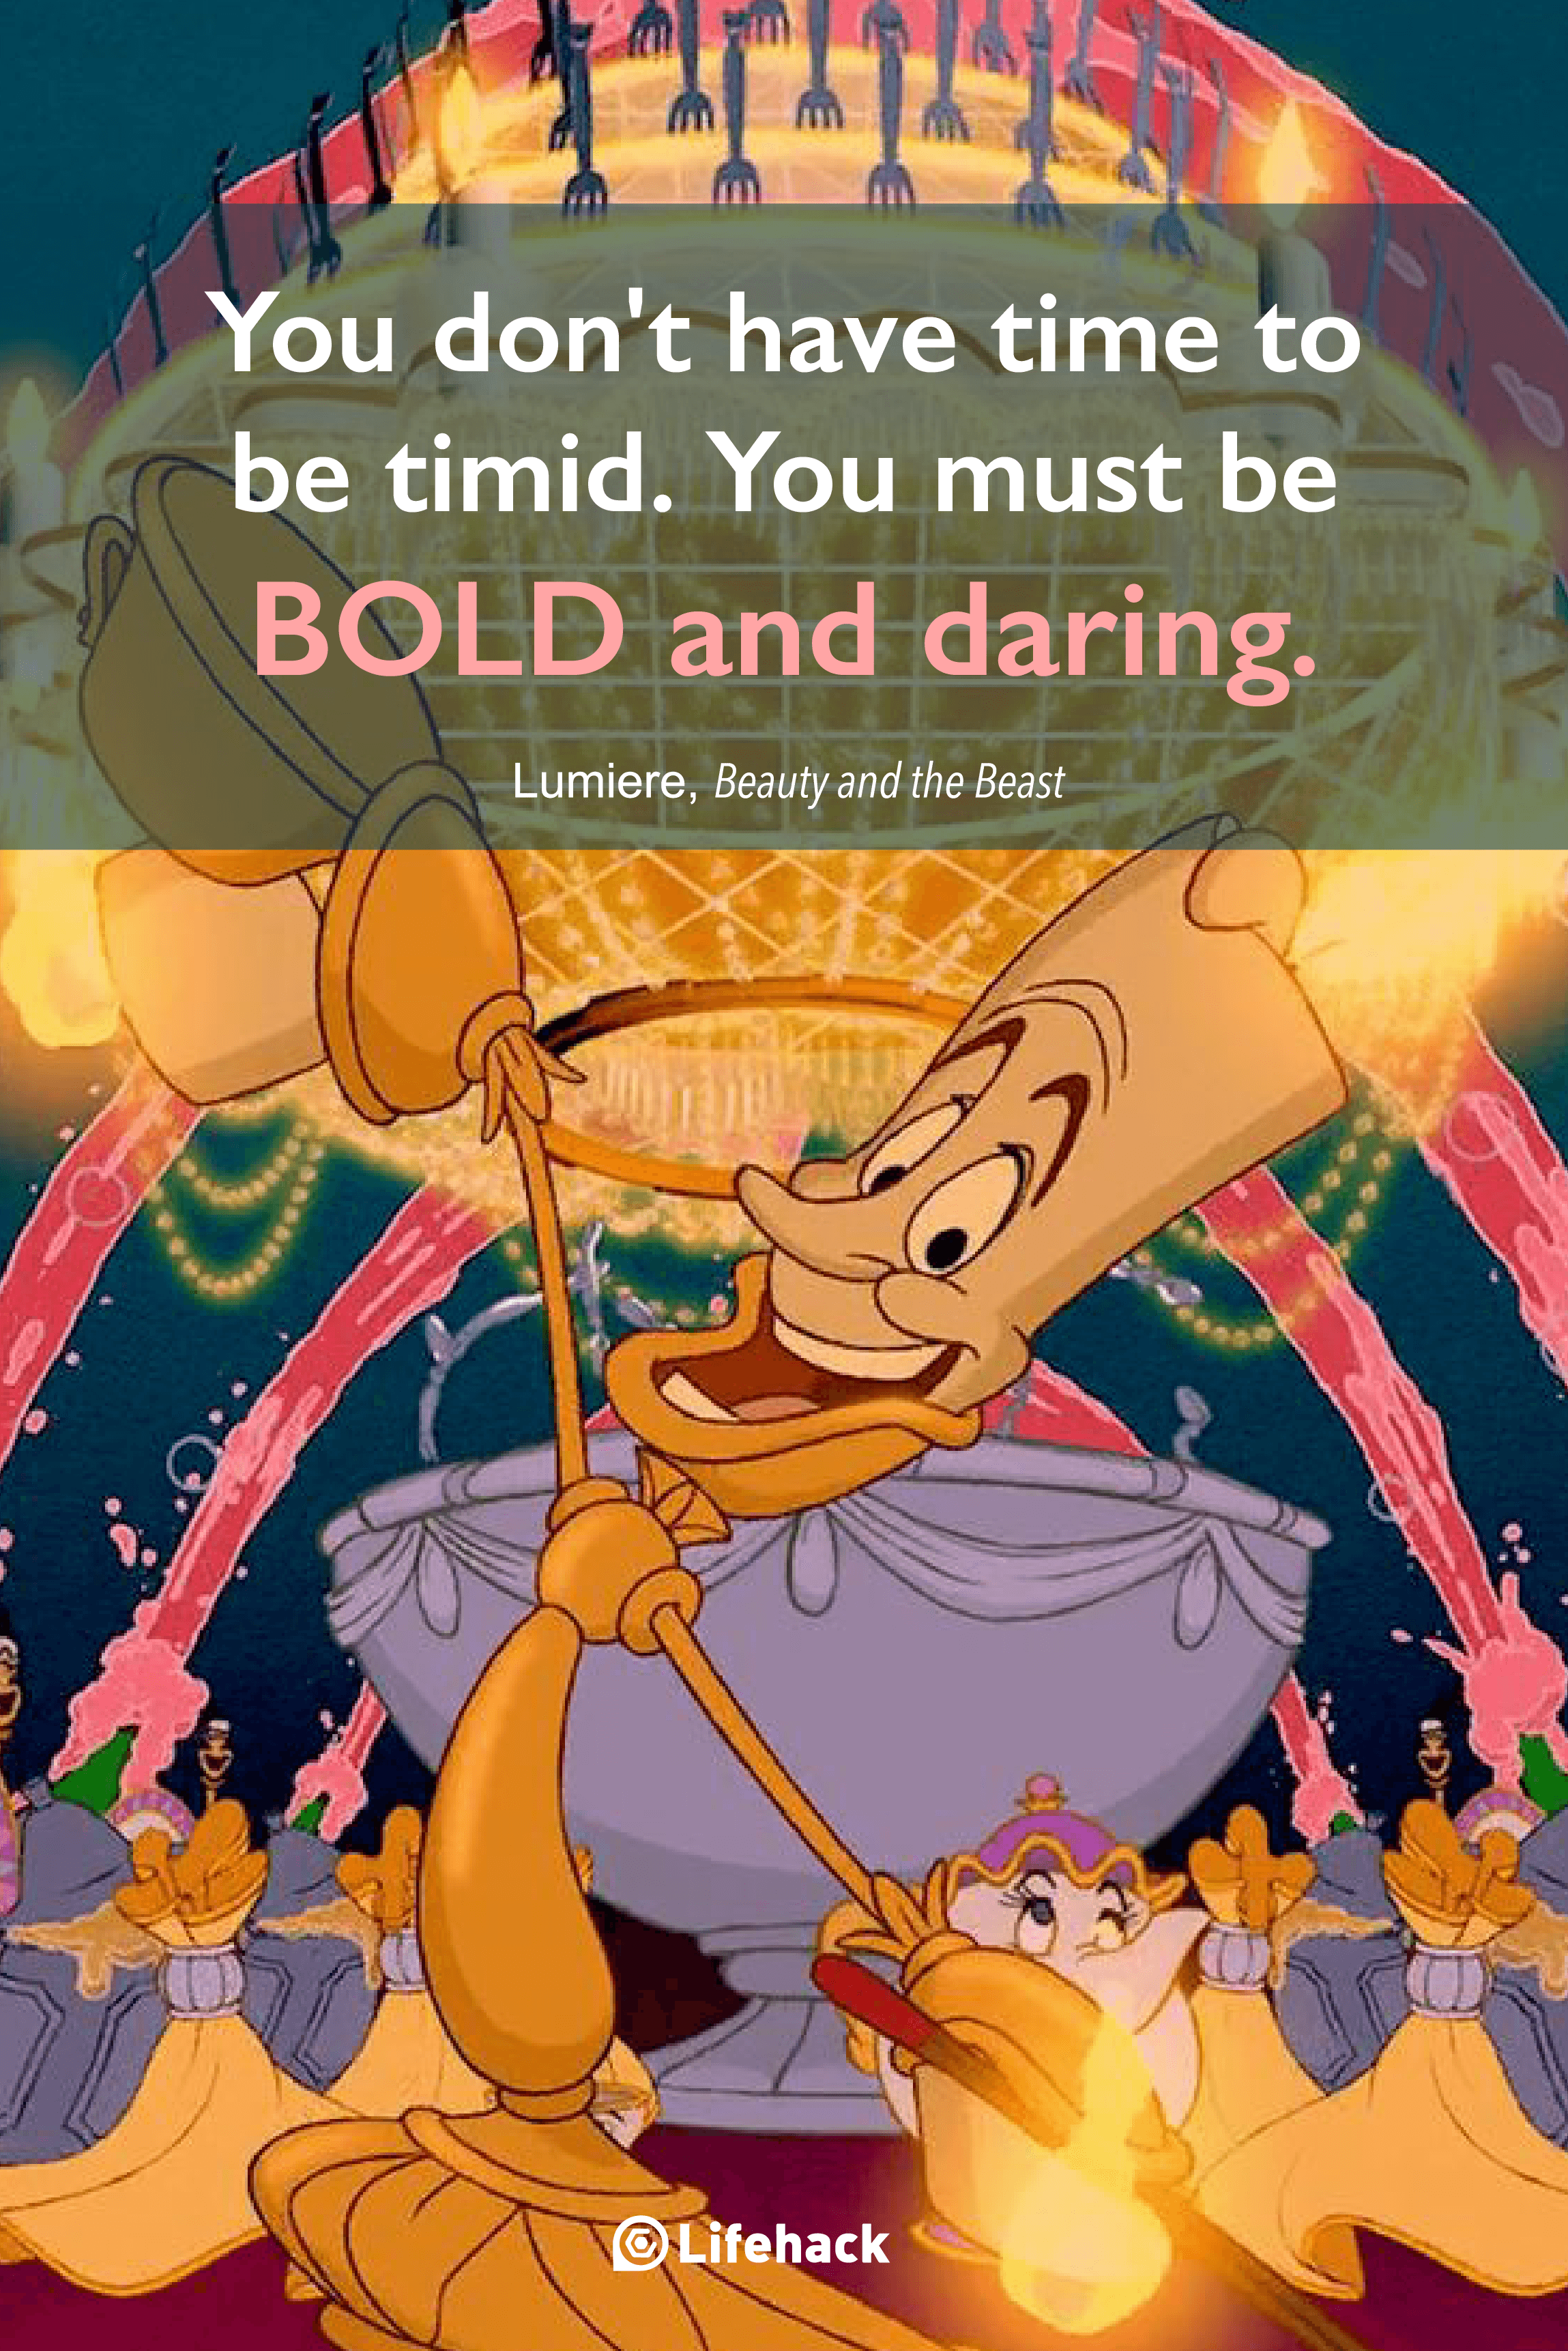 20 Charming Disney Quotes to Warm Your Heart